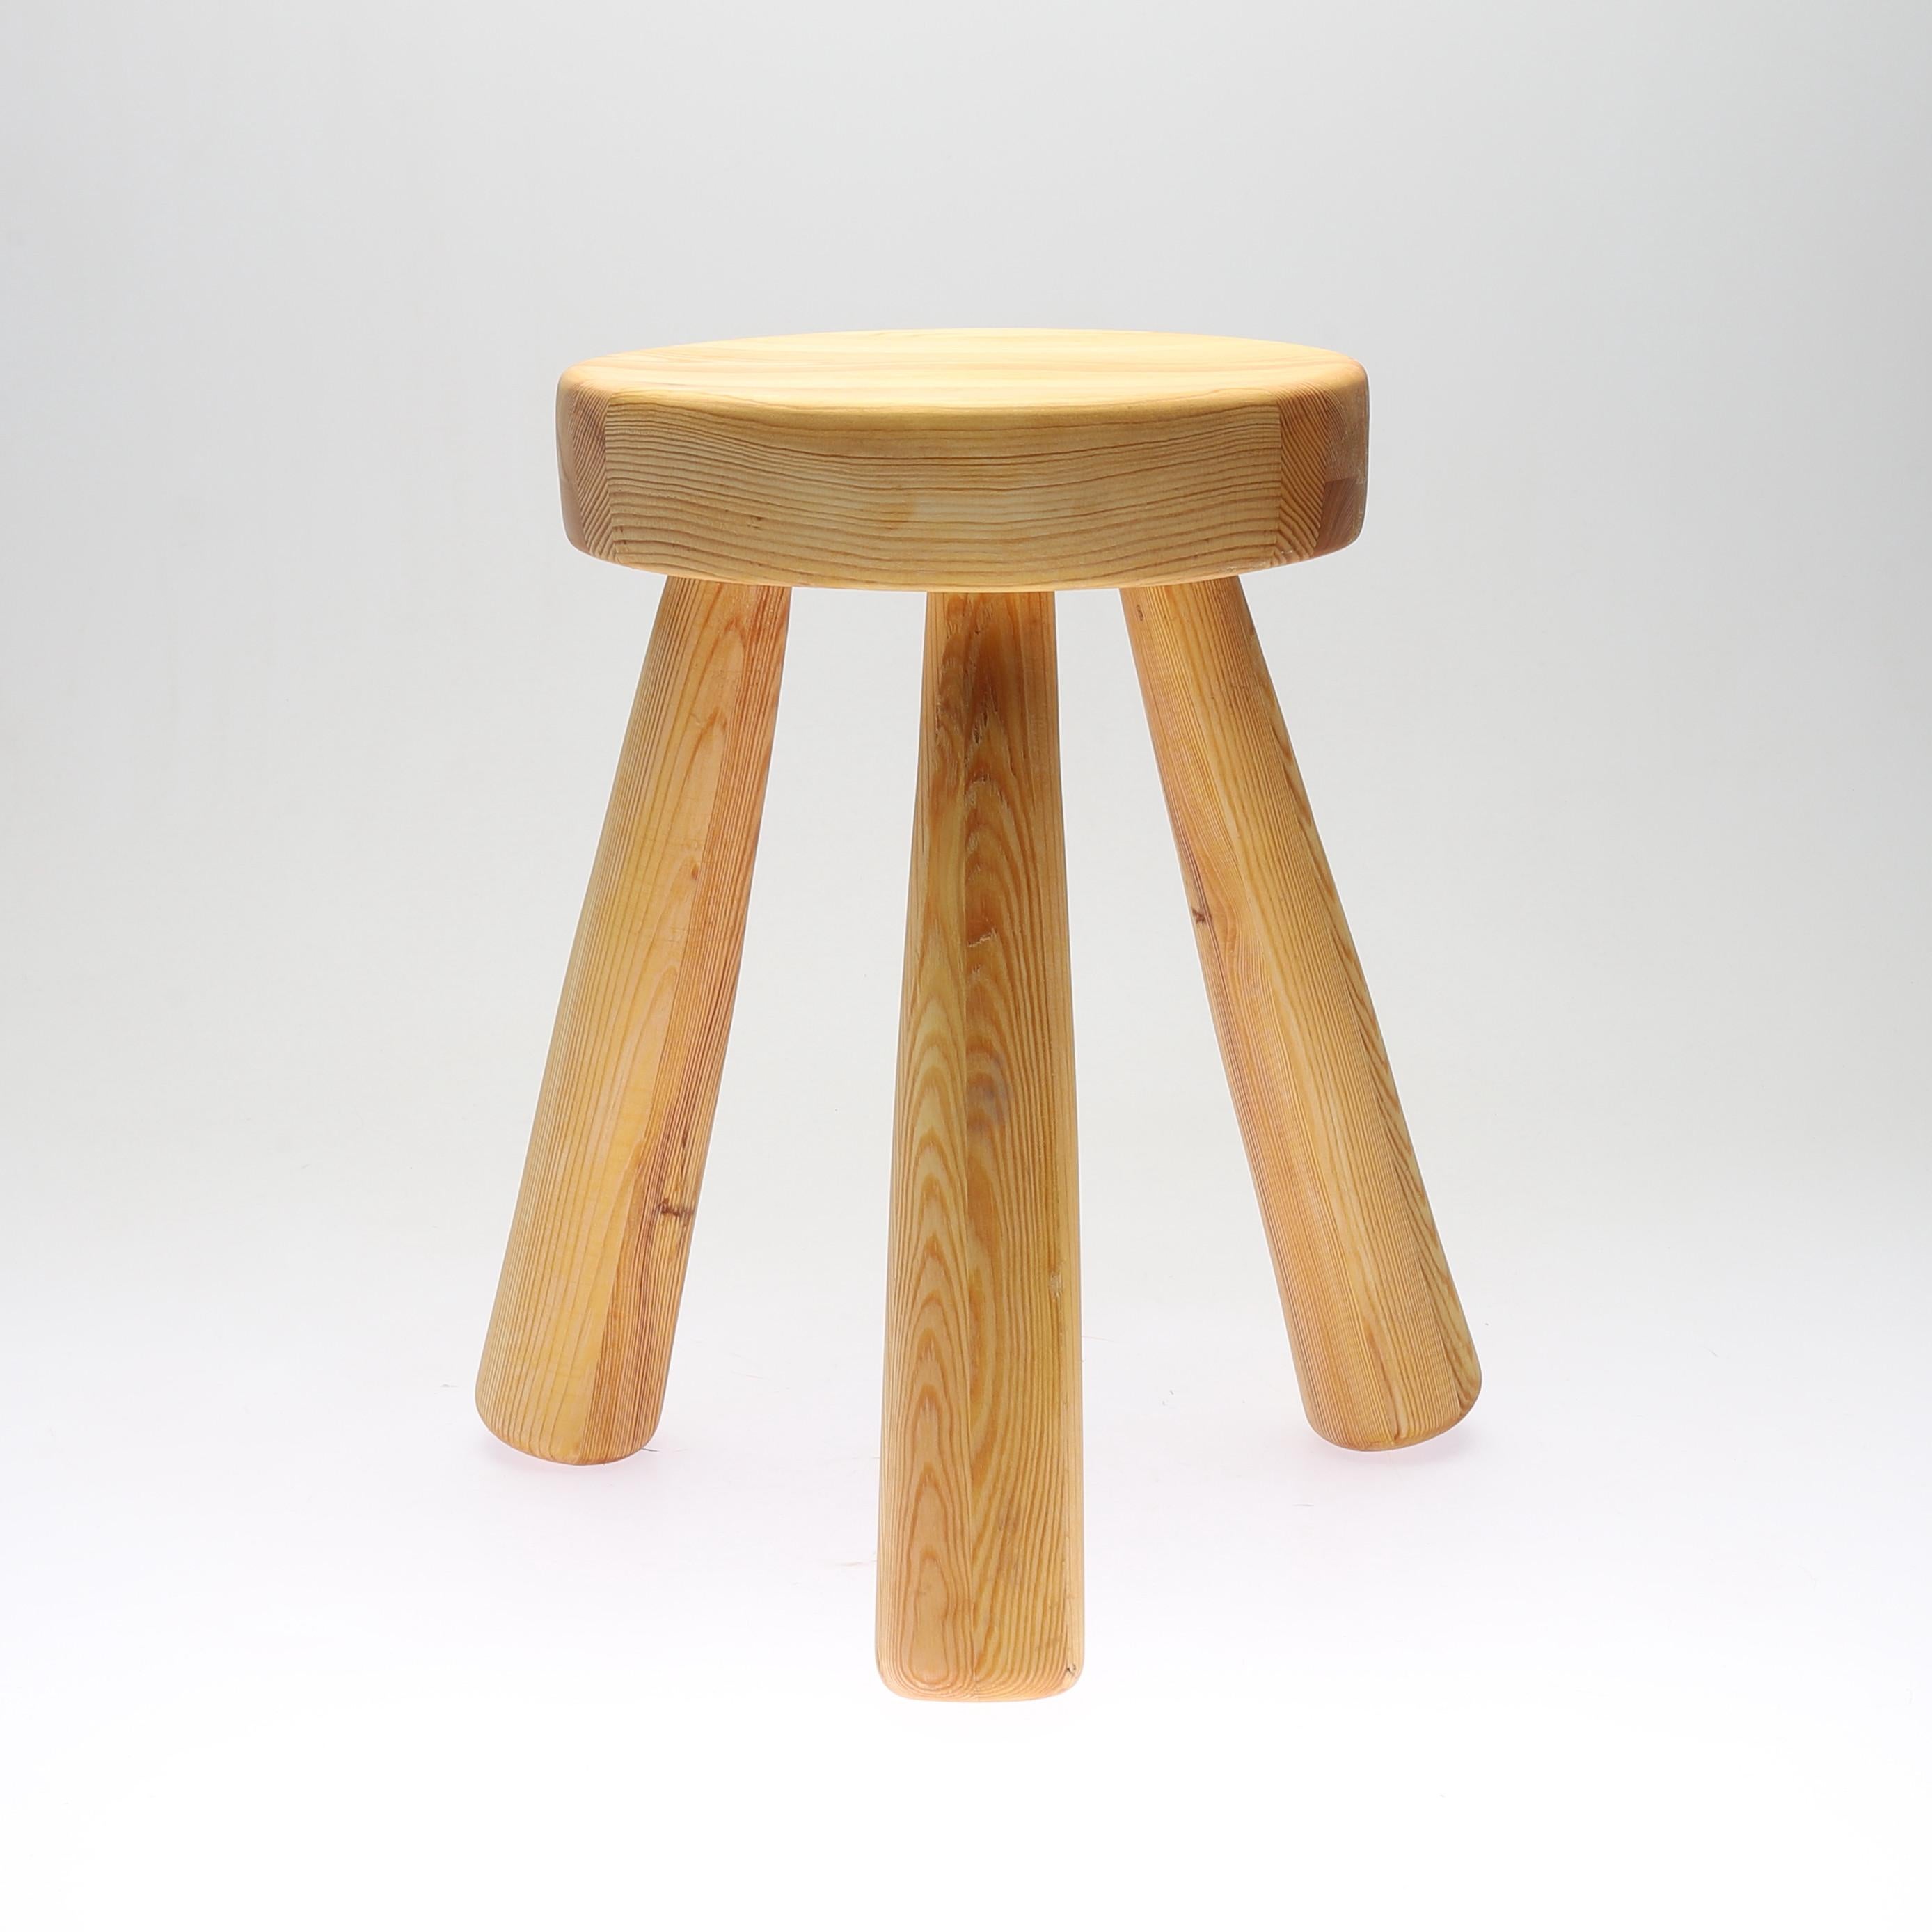 Sculptural pine 3-legged stool, designed and produced in the studio of Ingvar Hildingsson, Kalmar Läns Slöjdare IH Slöjd Rugstorp 1970's. Signed and labeled. In excellent condition.